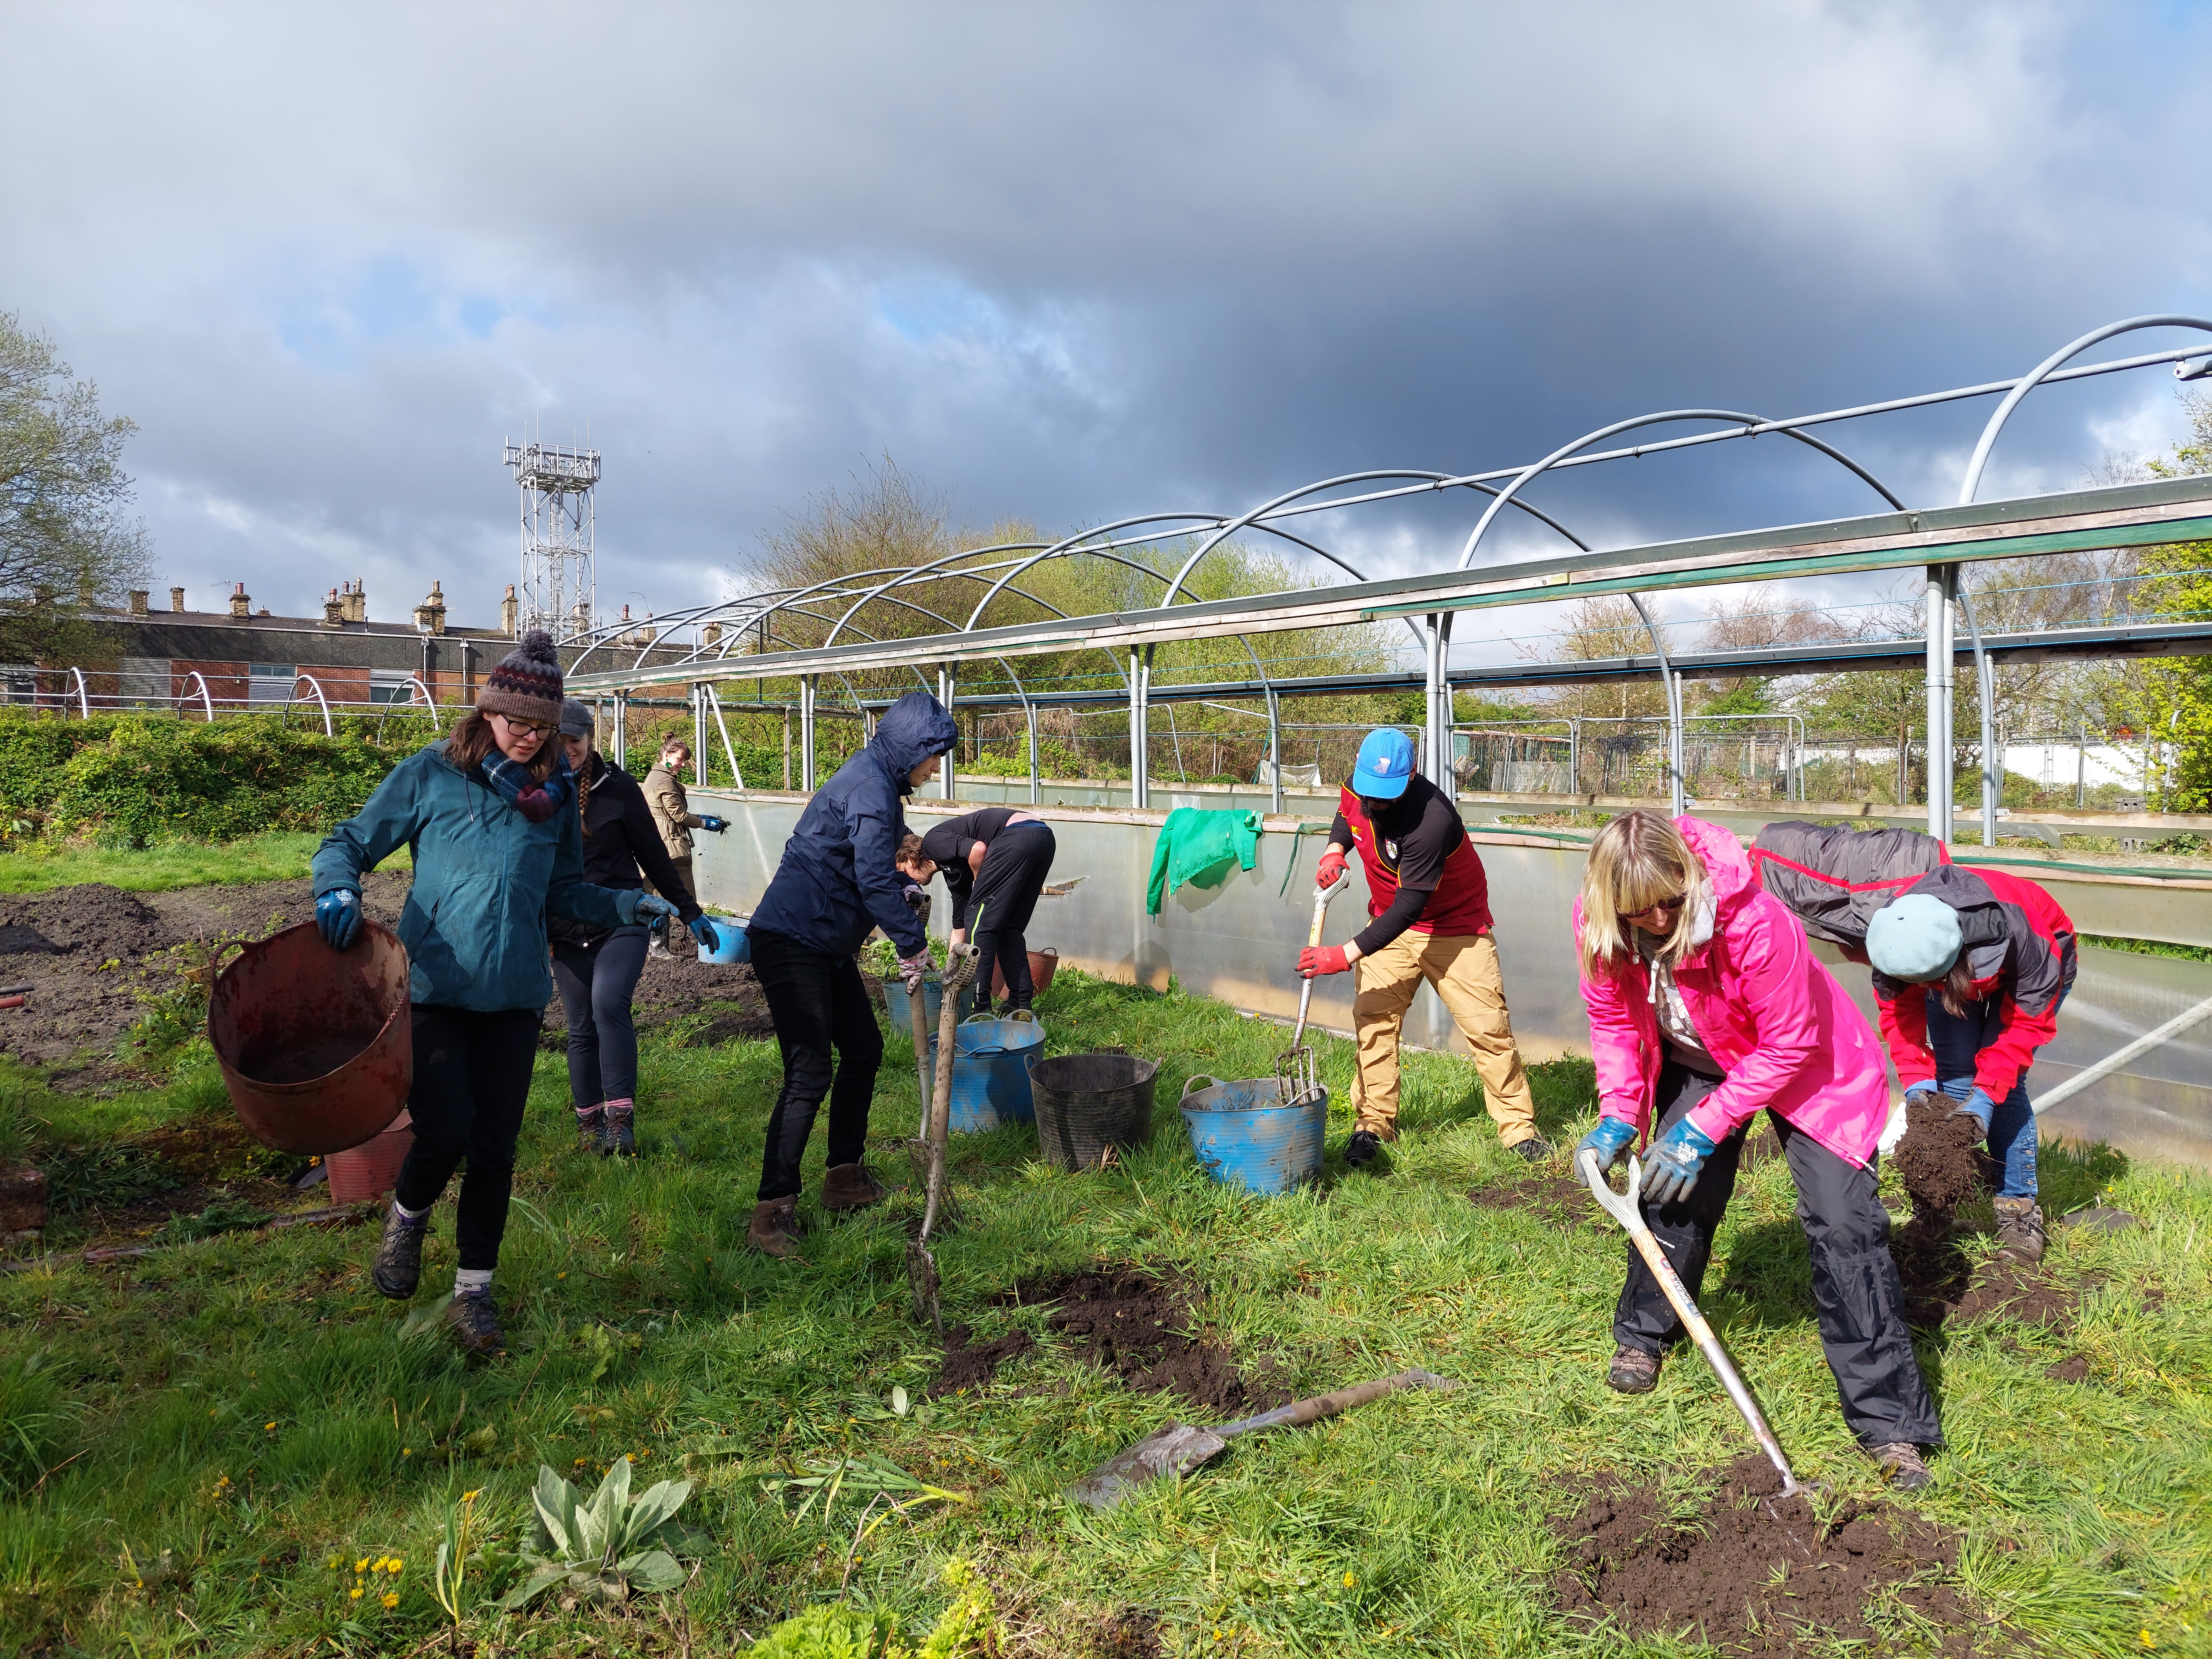 A small group of people dig over a patch of land next to a polytunnel